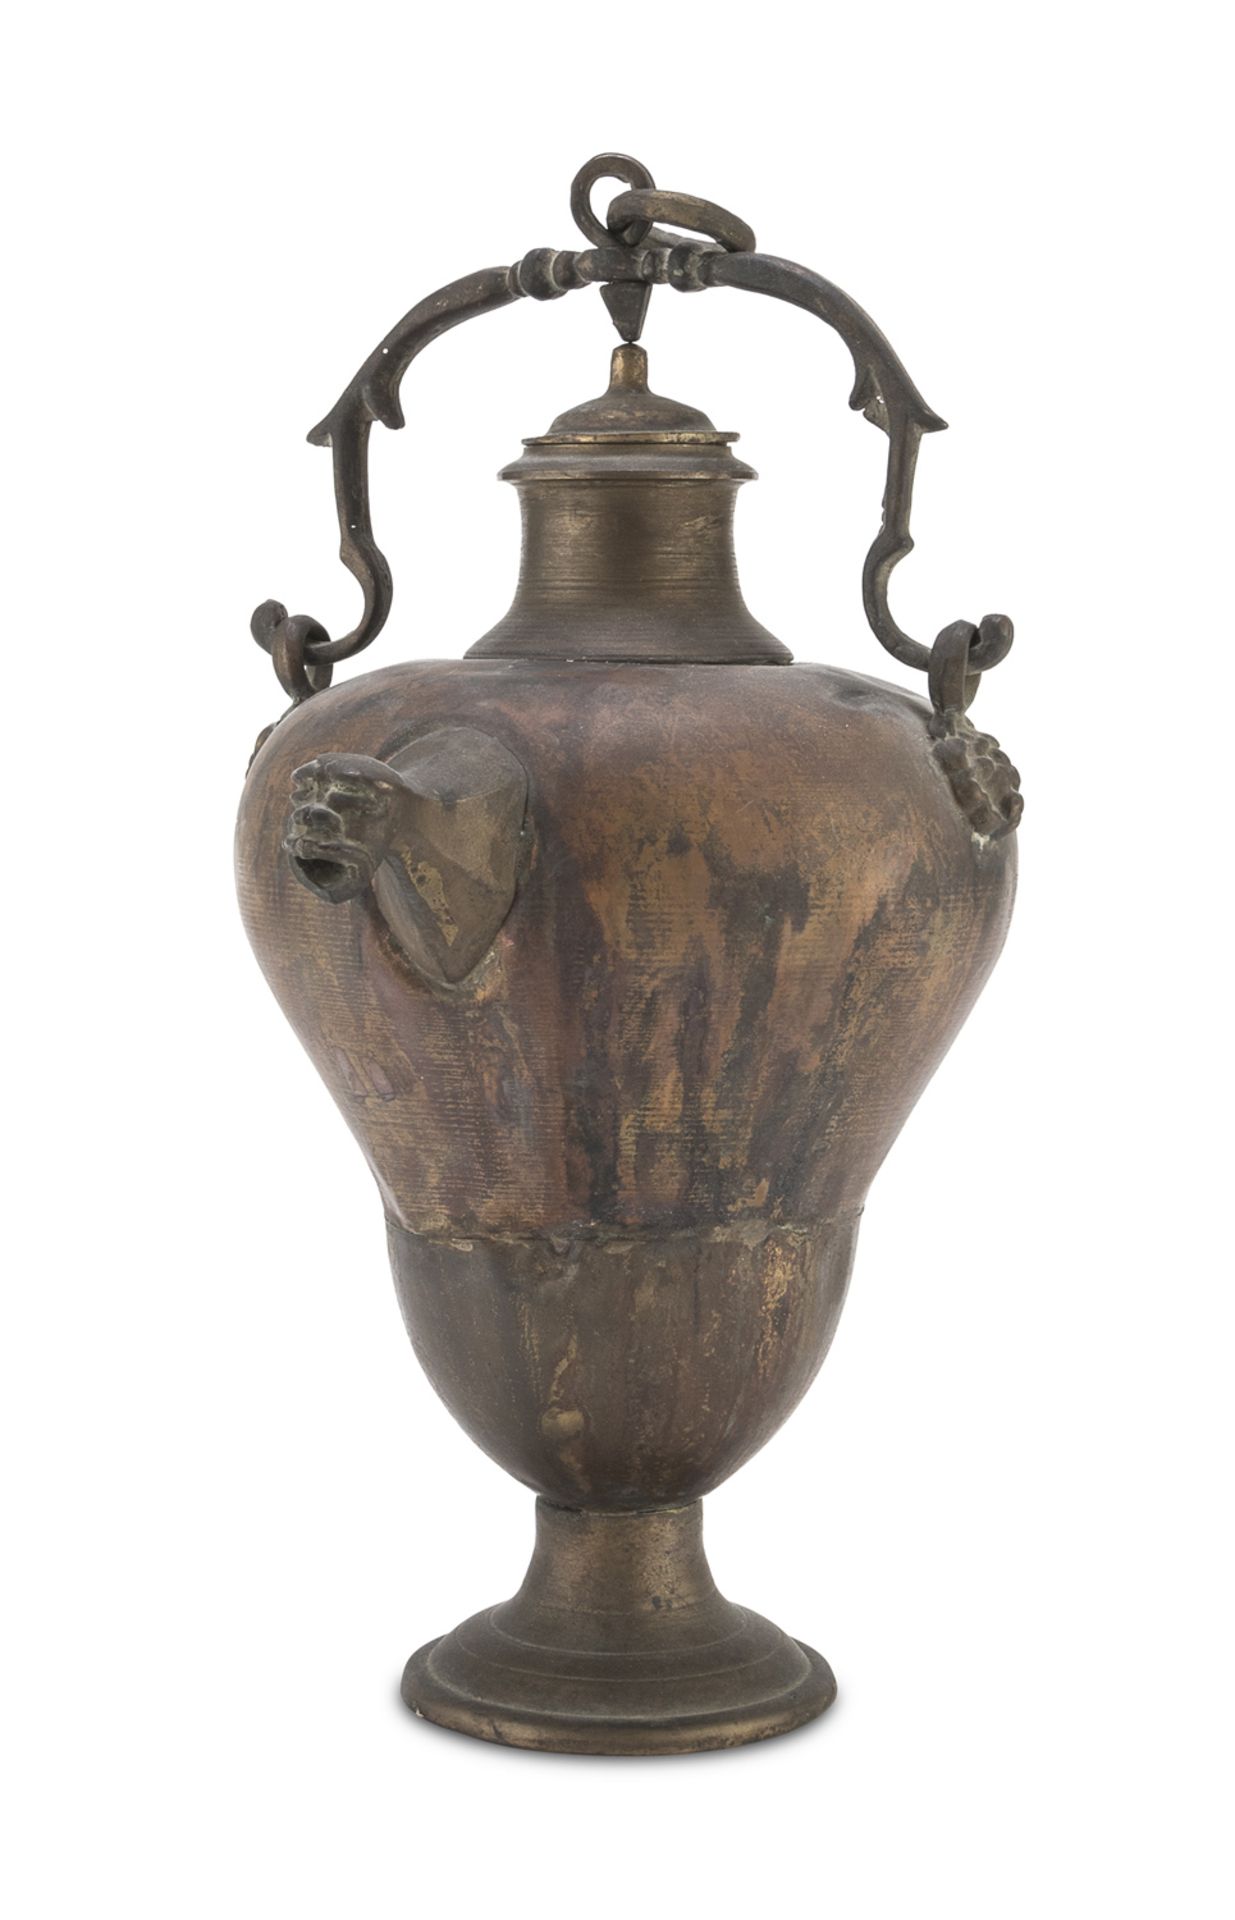 COPPER PITCHER CENTRAL ITALY 19th CENTURY